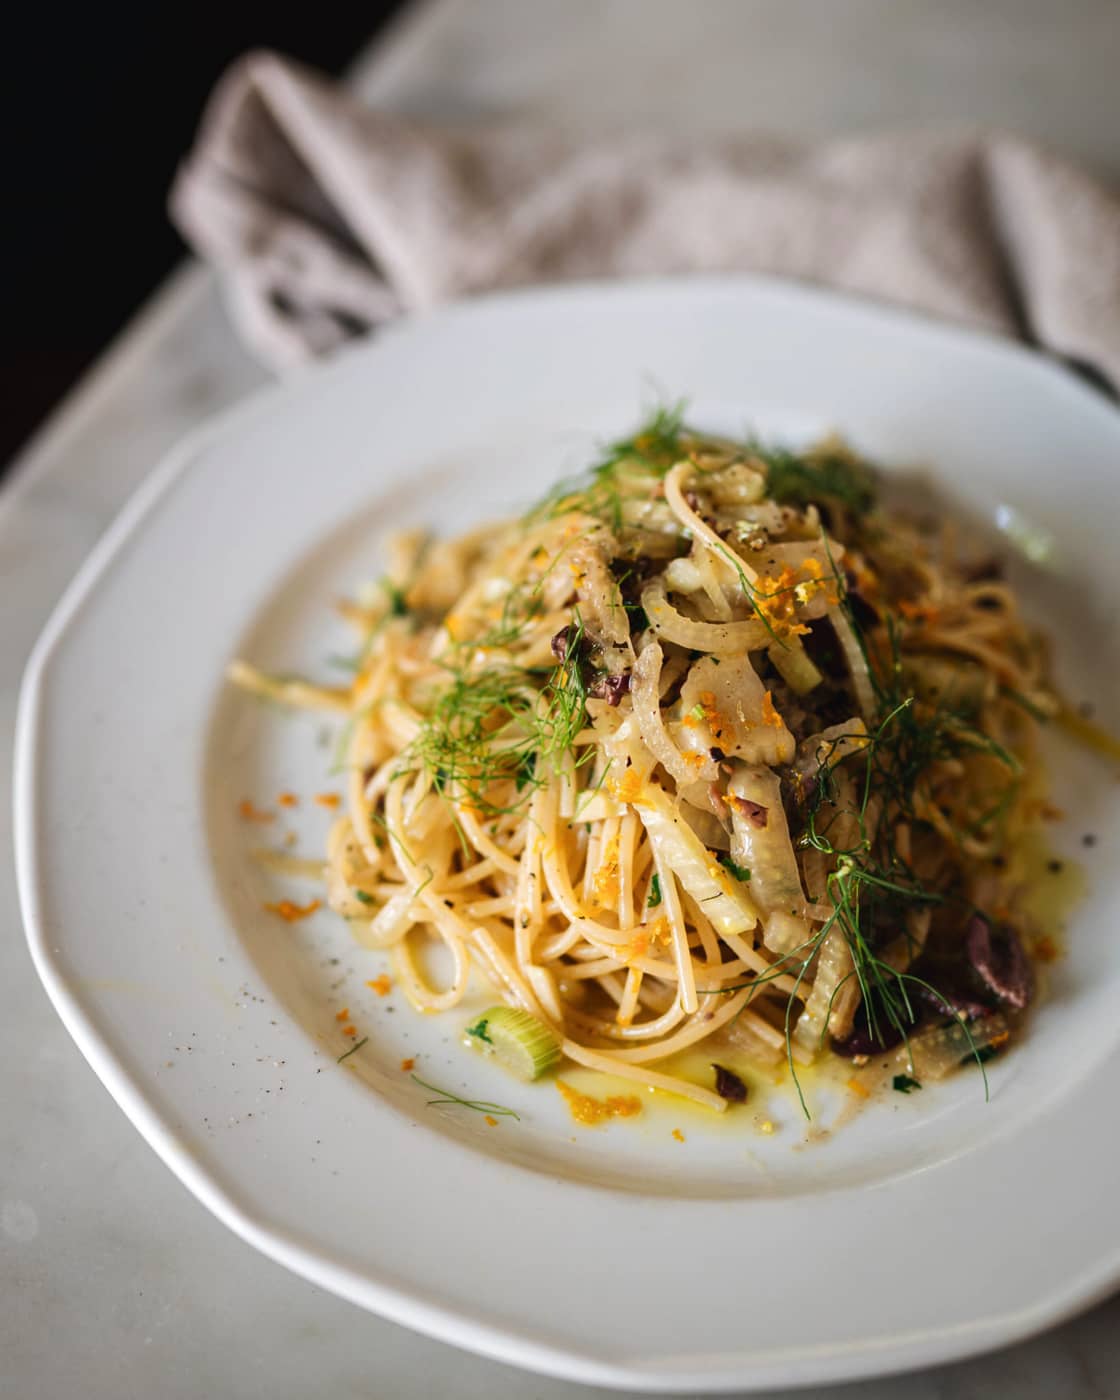 SPAGHETTI WITH FENNEL AND OLIVES